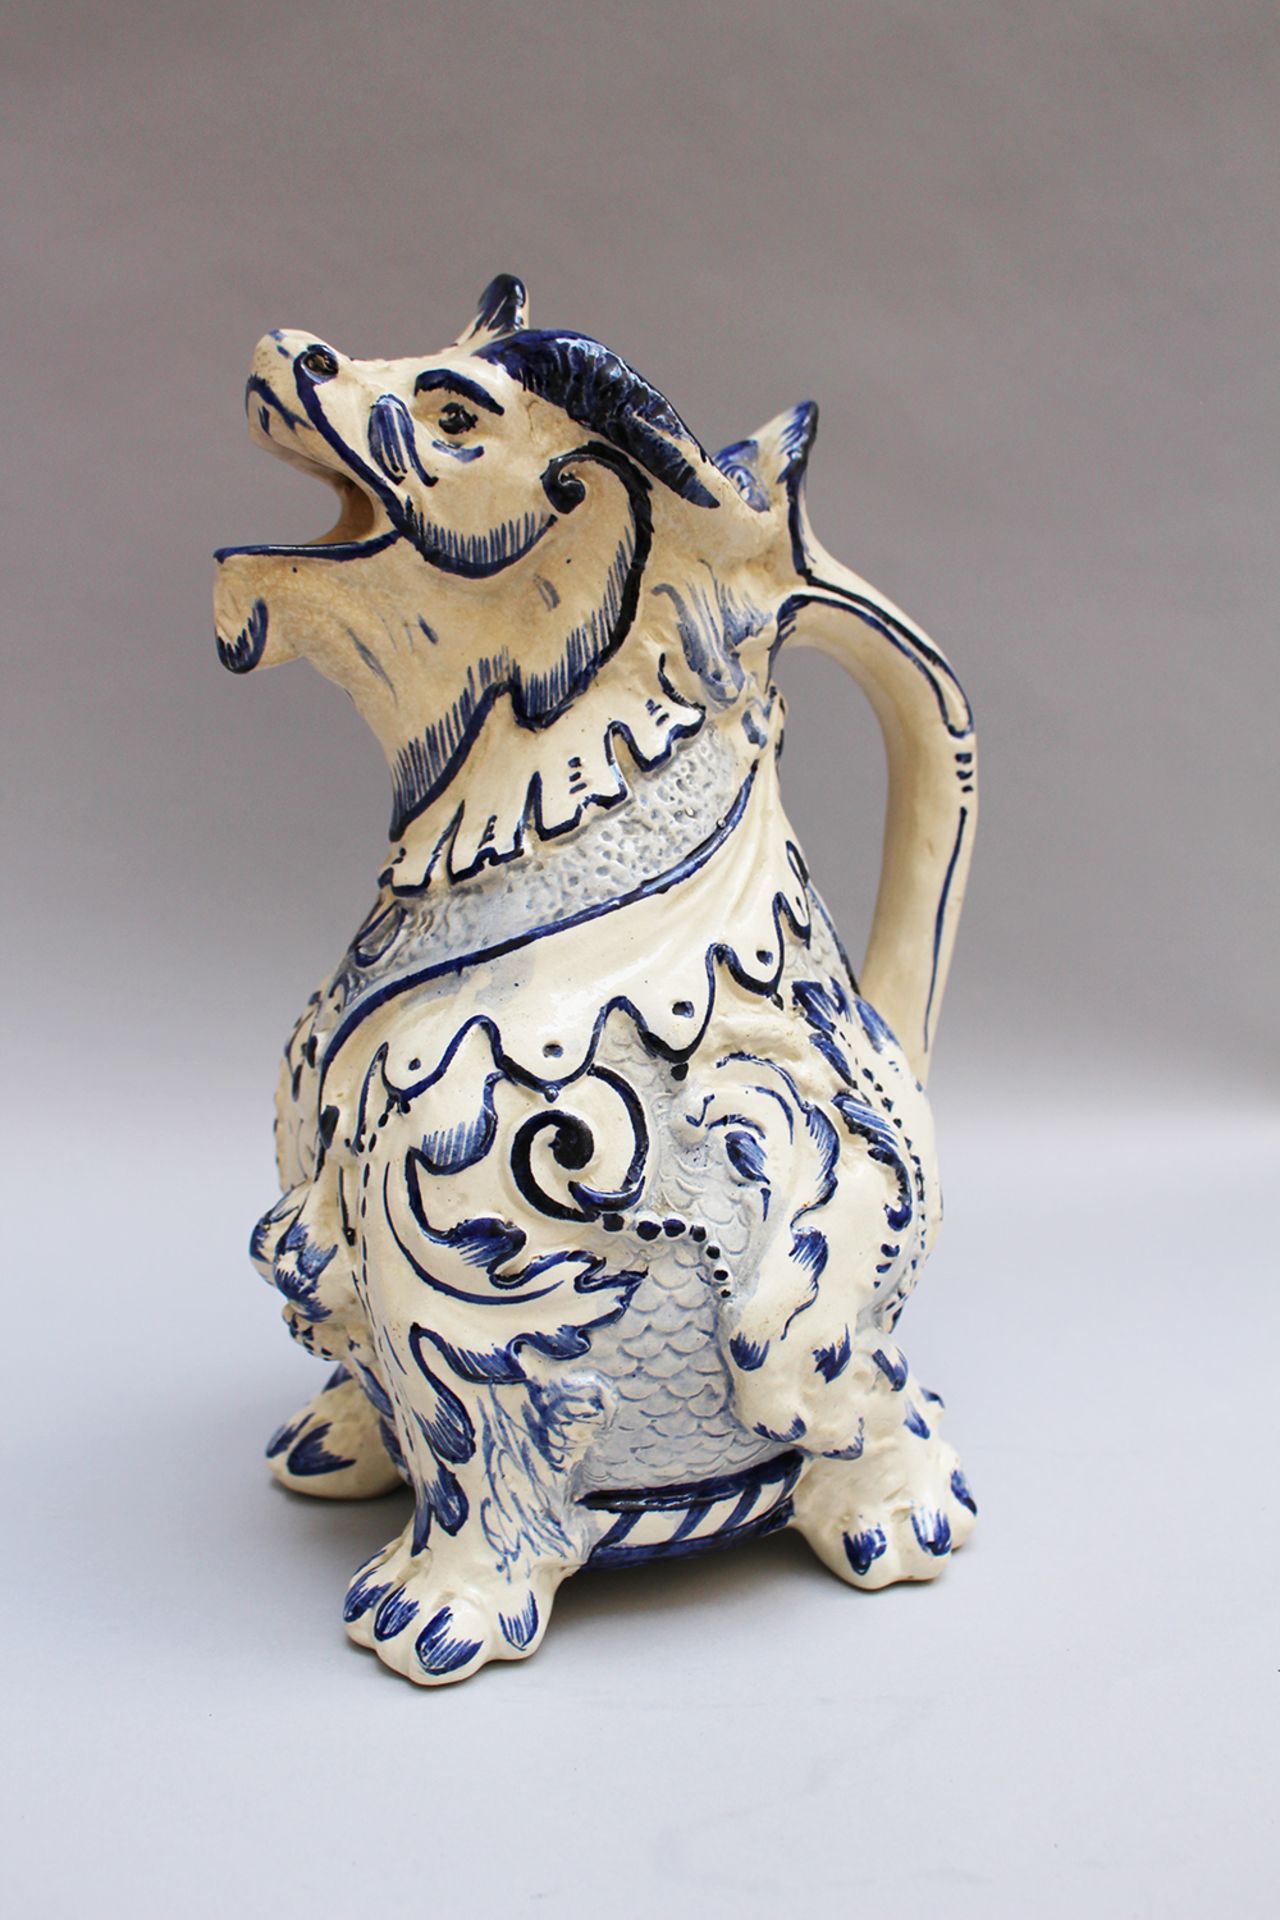 Ceramic jug in Emille Galle (1846-1904)- manner, lion with open mouth and handgrip, painted and glaz